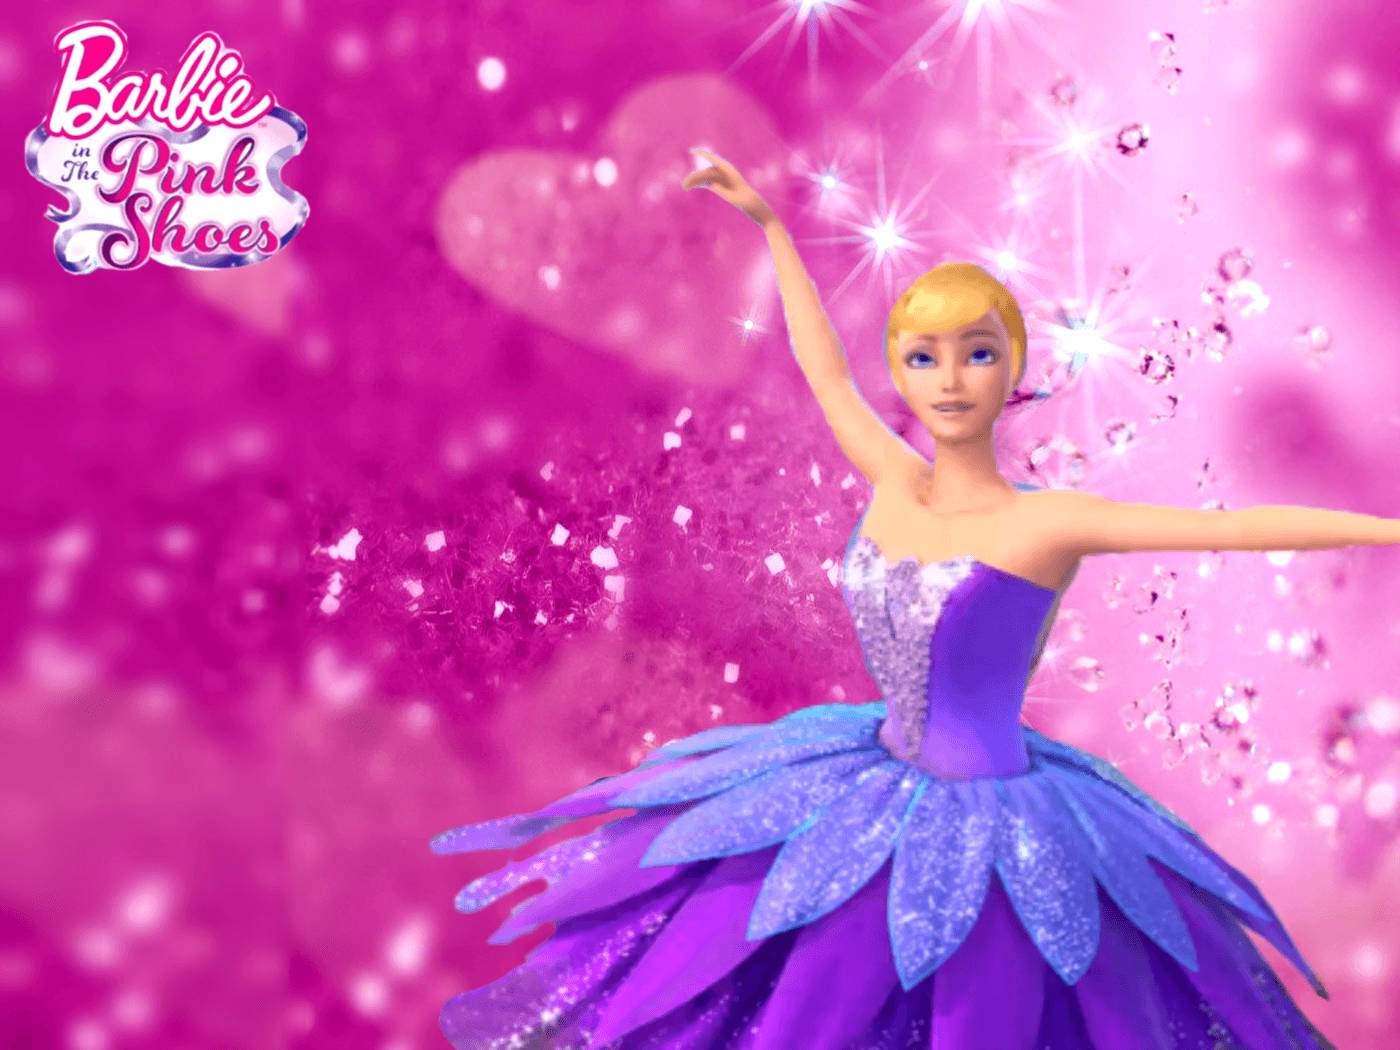 Barbie In The Pink Shoes Ballerina Wallpaper